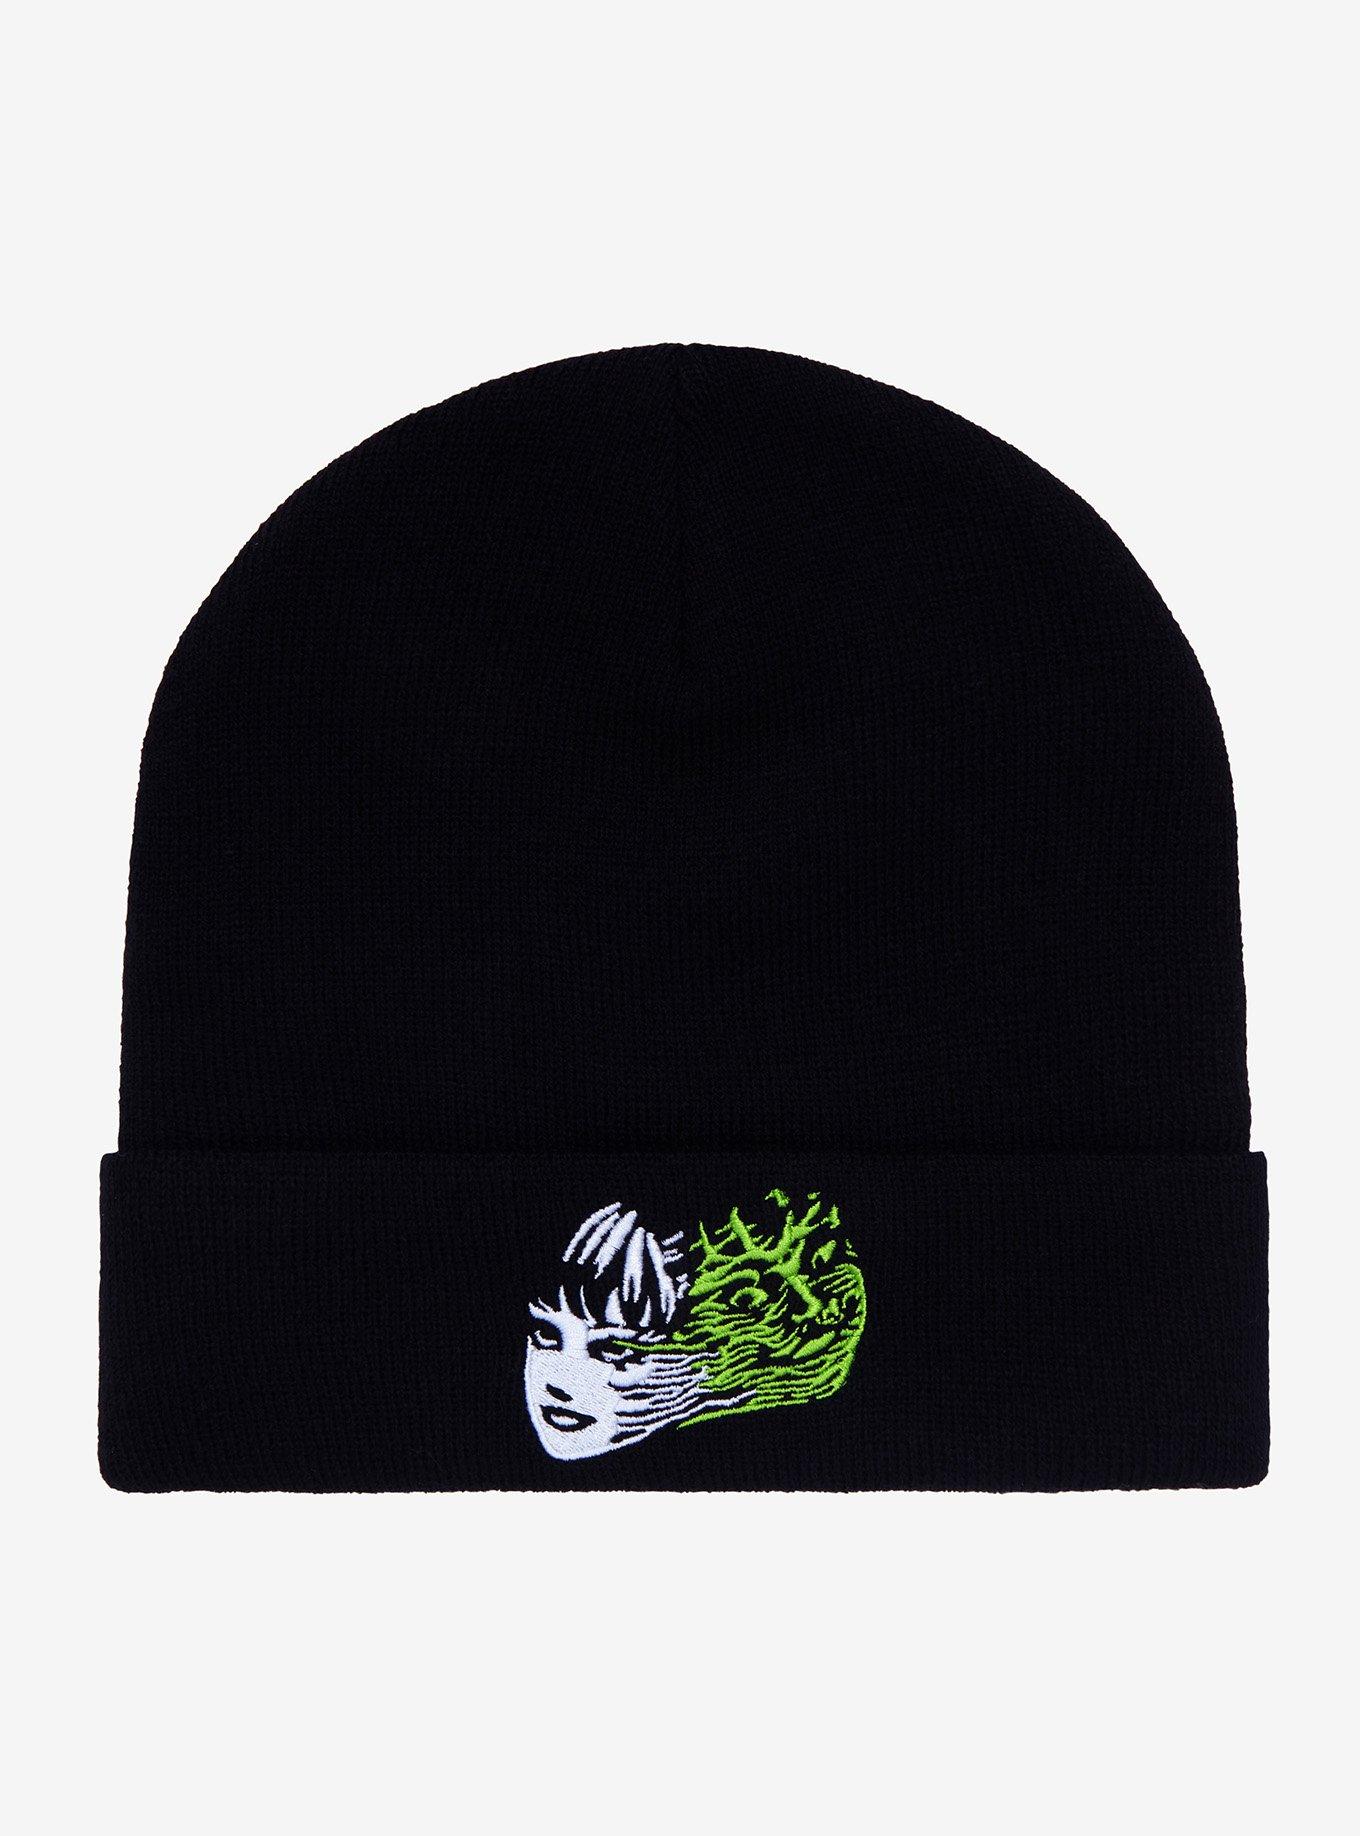 Junji Ito Split Face Embroidered Beanie, , hi-res